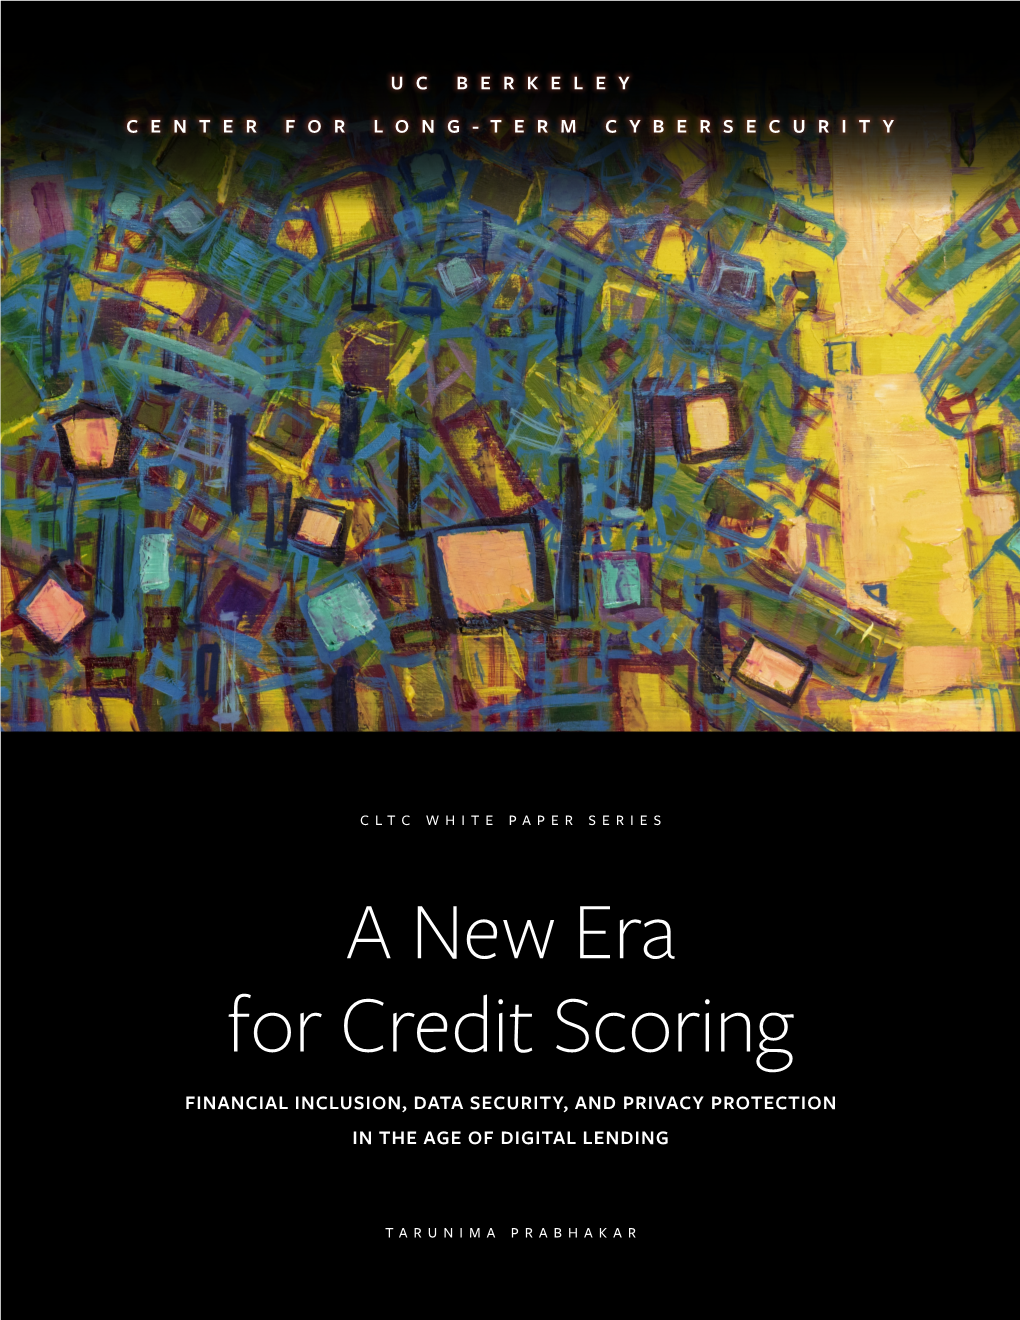 A New Era for Credit Scoring